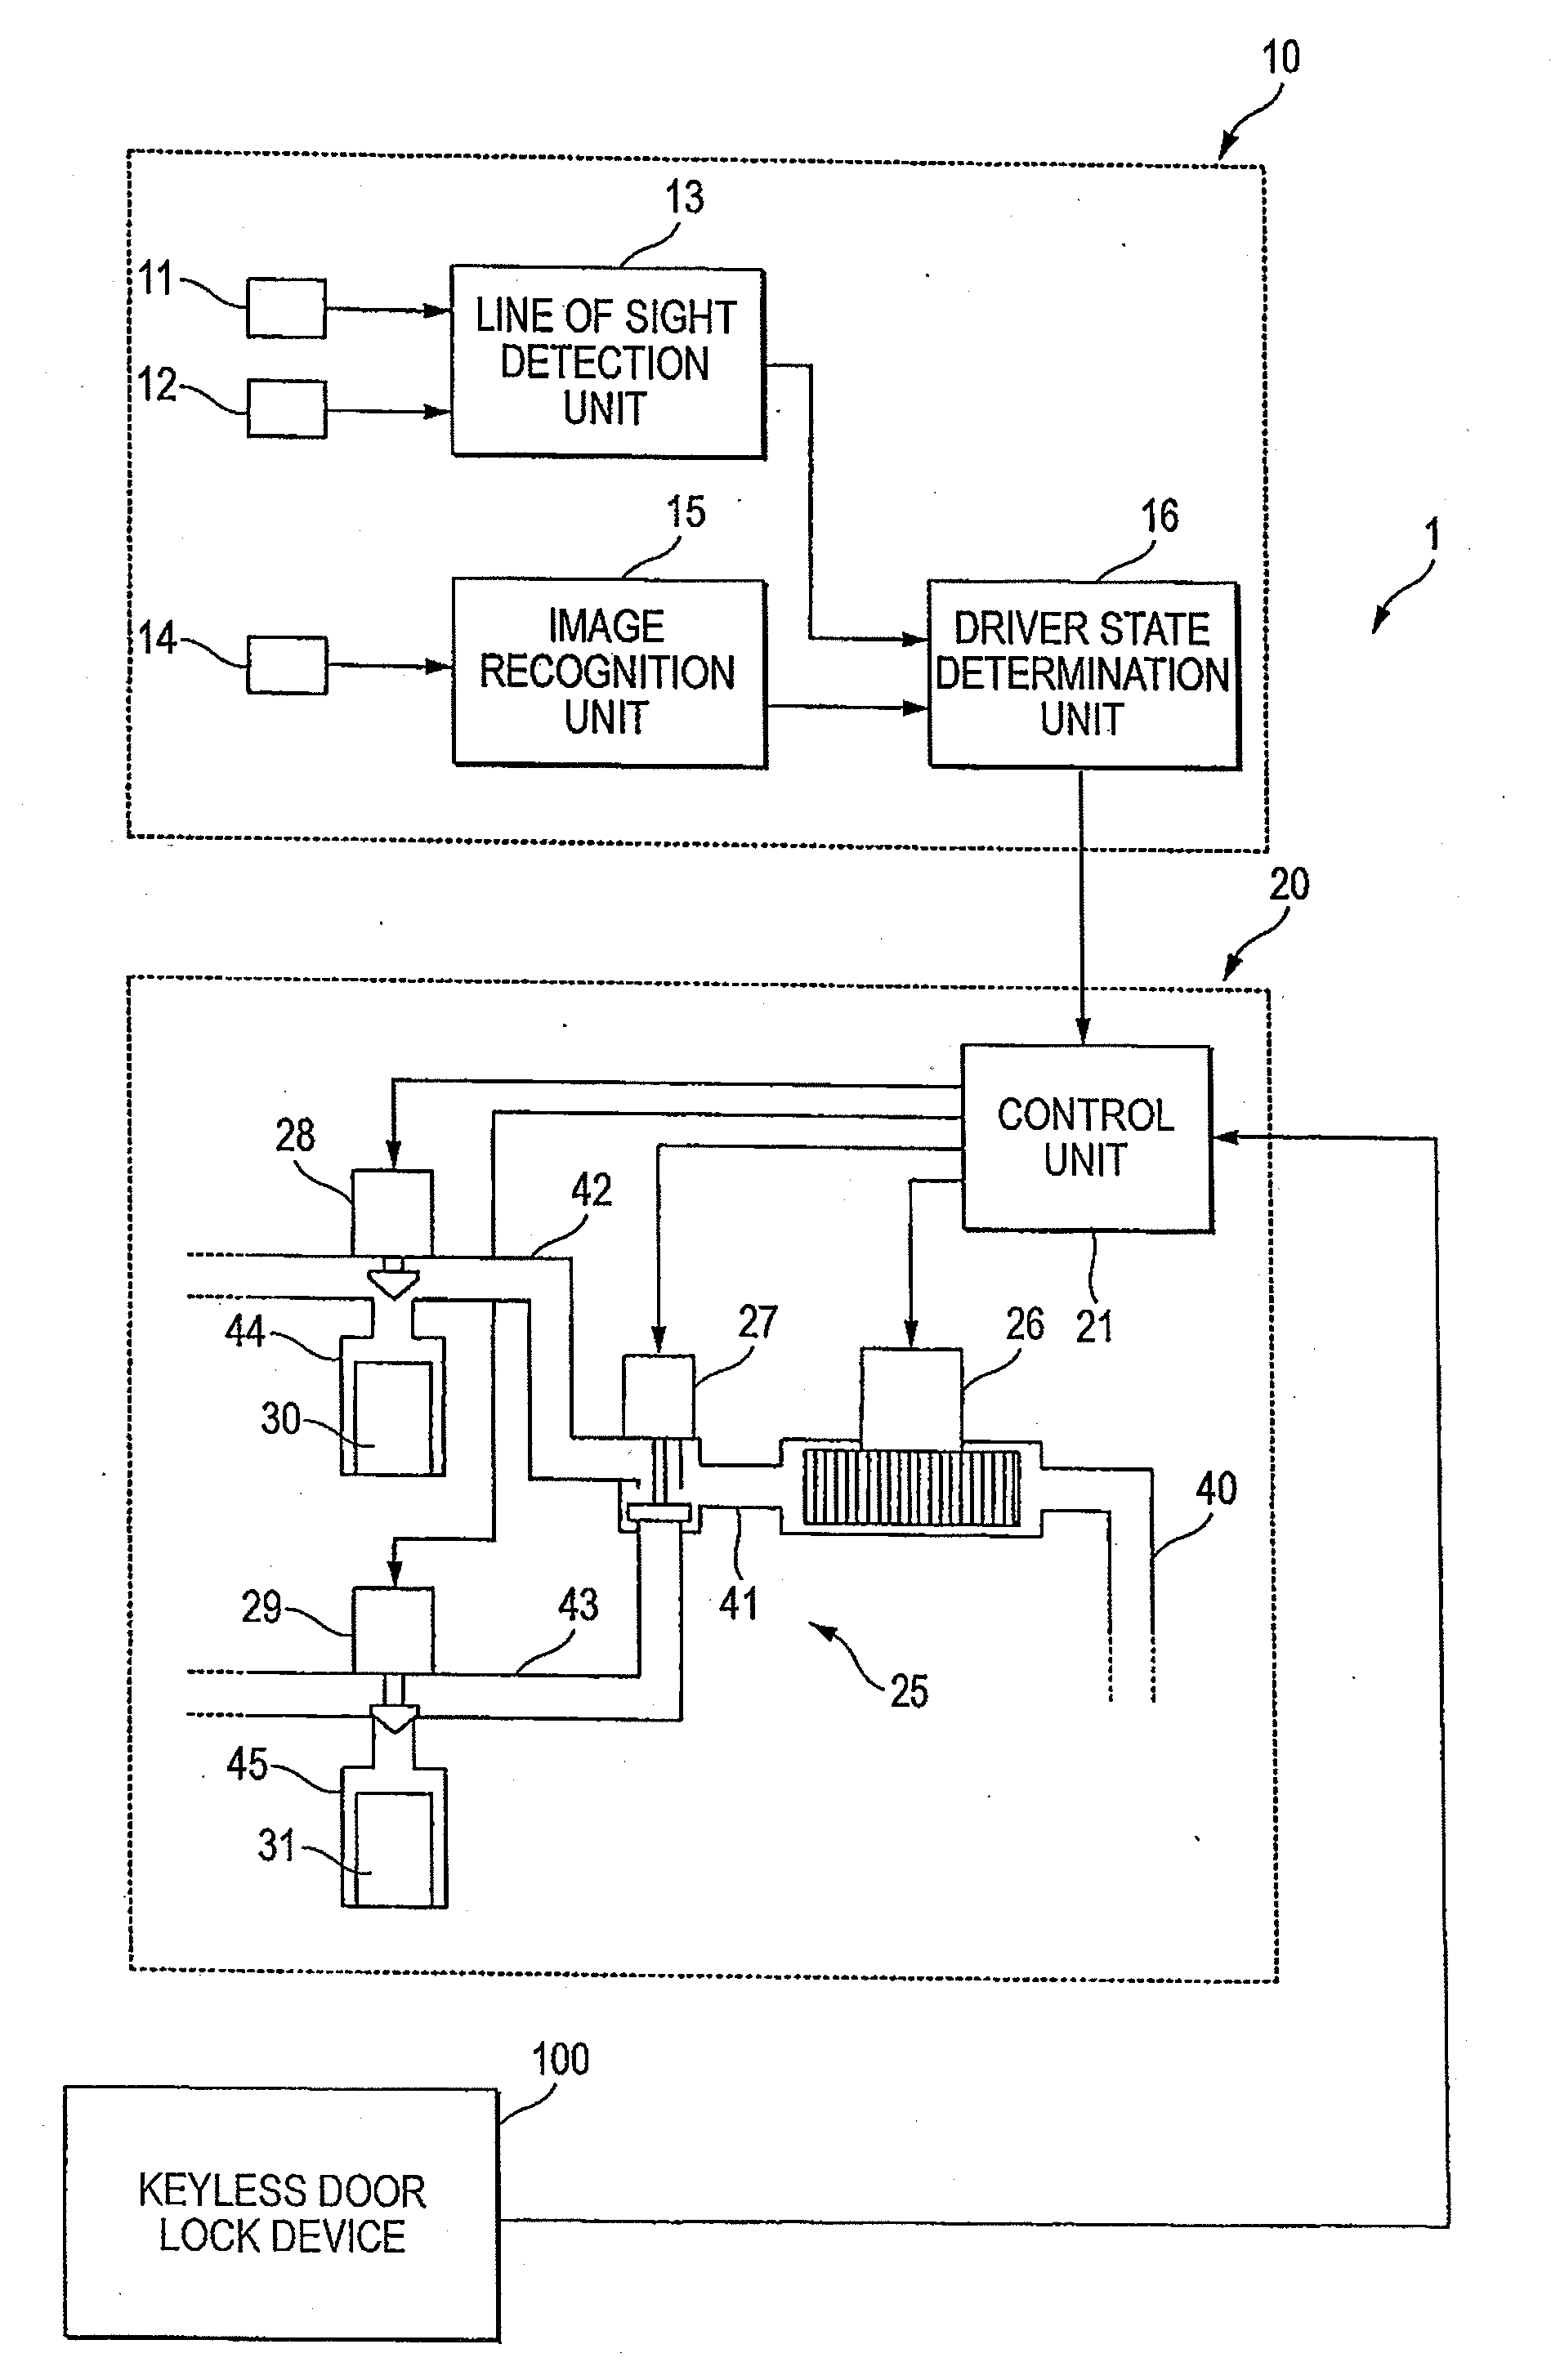 Driving support system using fragrance emitting